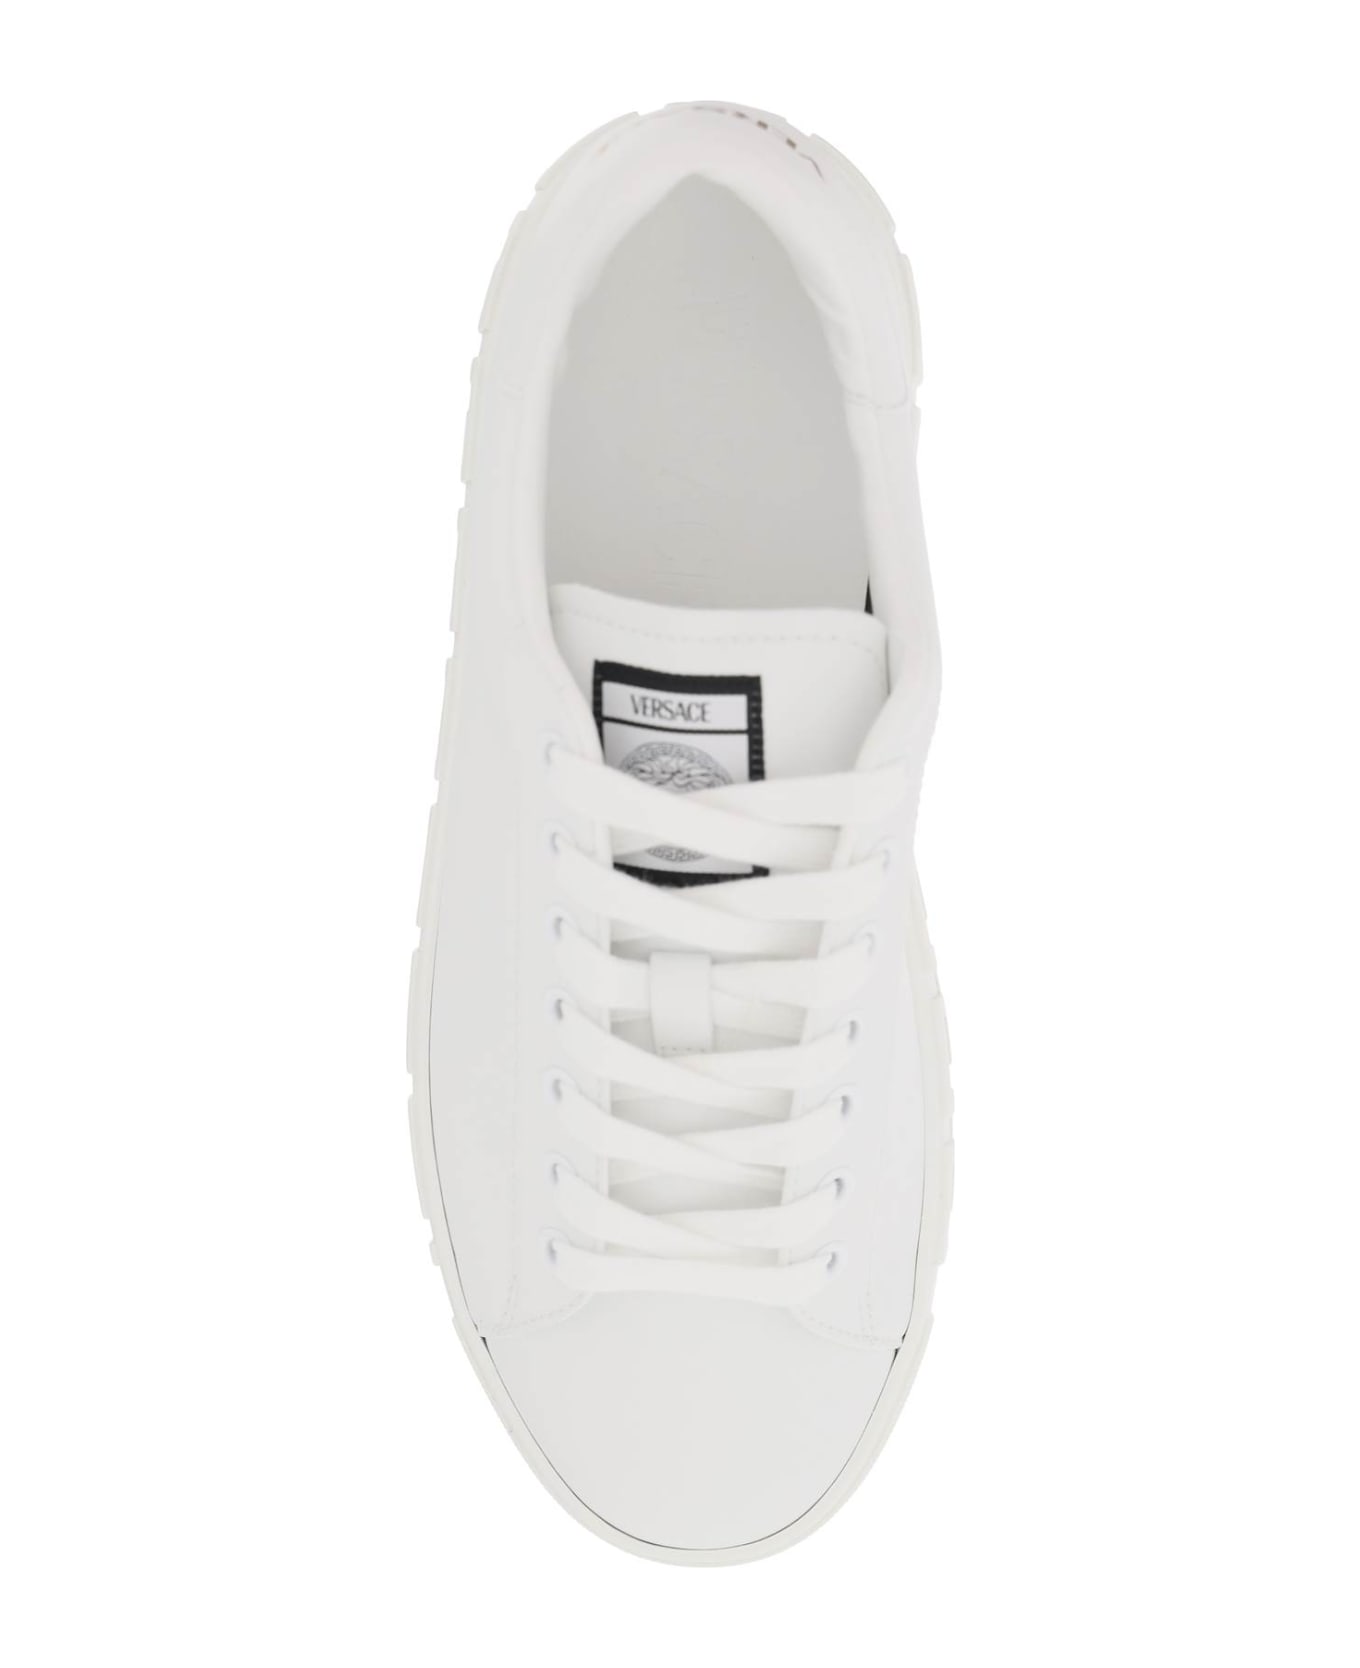 Versace White Leather Sneakers - White